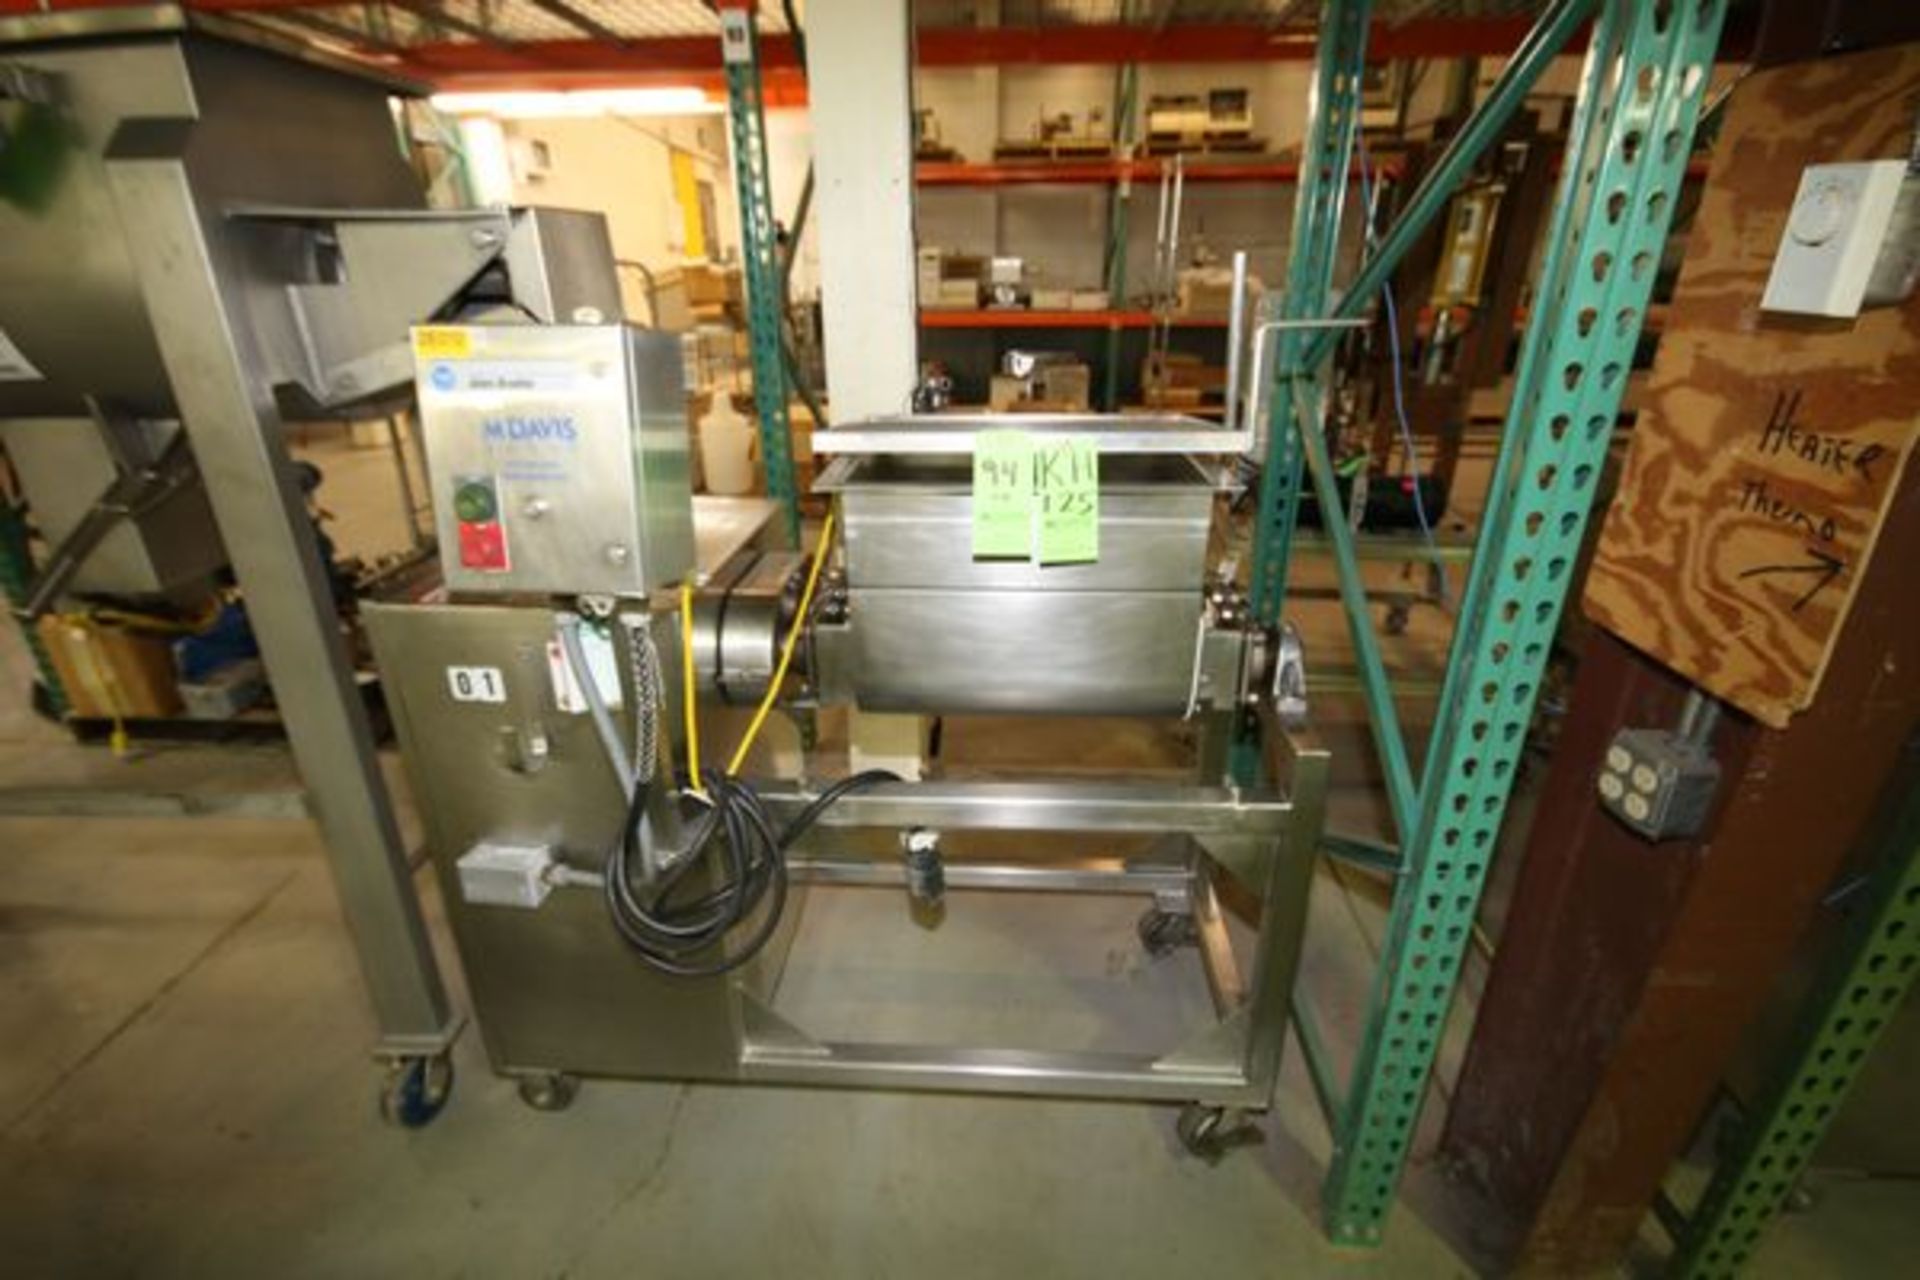 Twin Shaft Mixer, Approximate 5 Cubic Feet, Stainless Steel. 2hp Variable speed motor